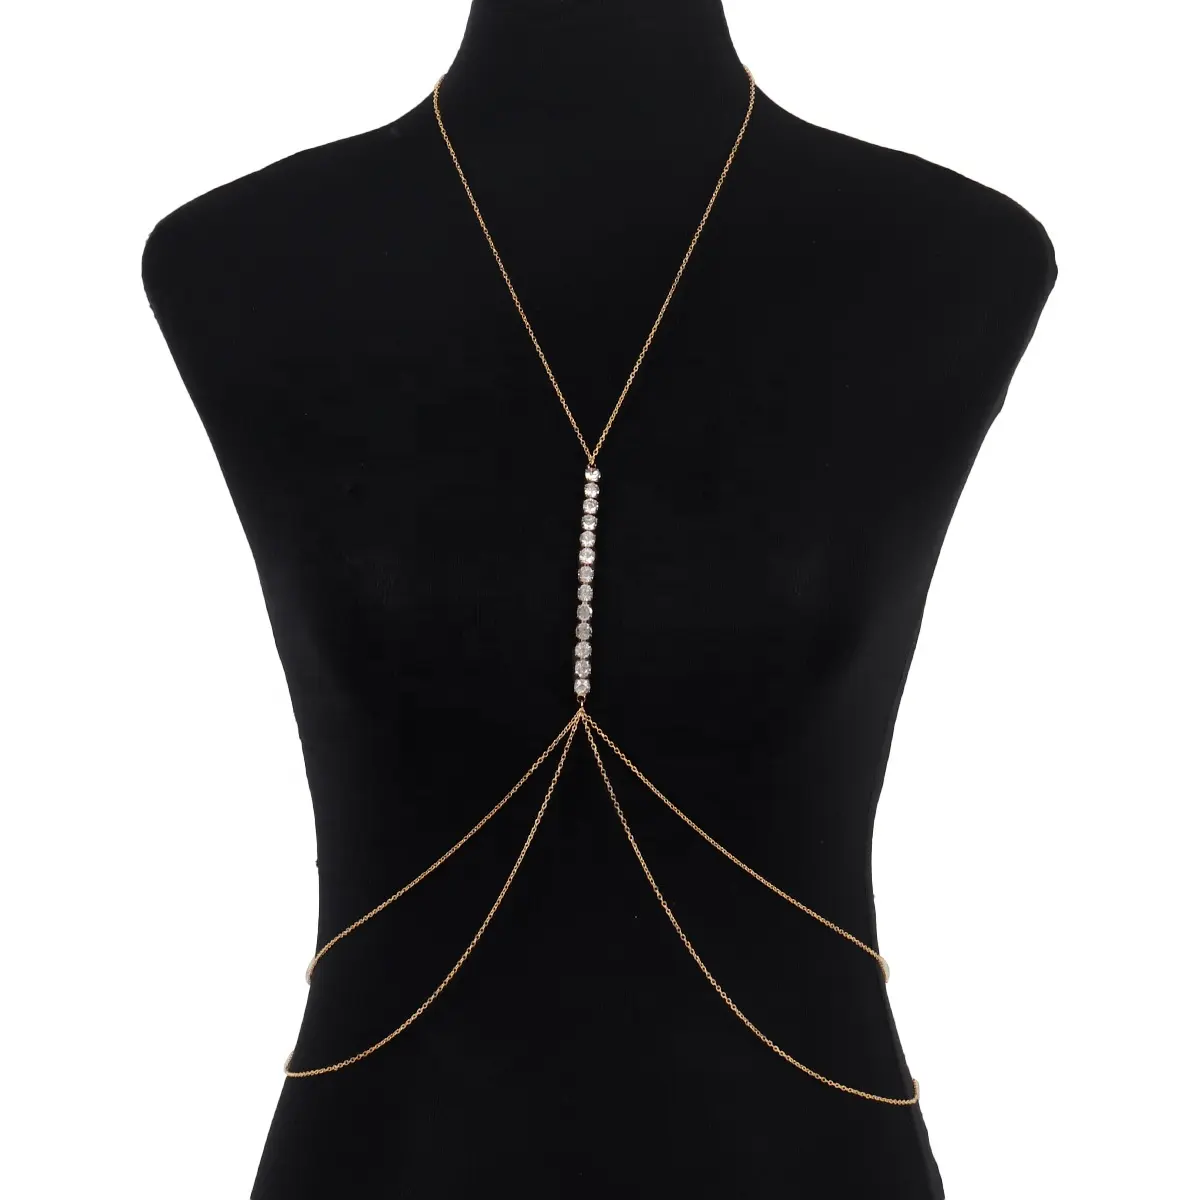 Women's Chest Accessories Fashionable And Exquisite Jewelry Chest Chain Body Chain Temperament Diamond Inlaid Alloy Sexy Opp Bag